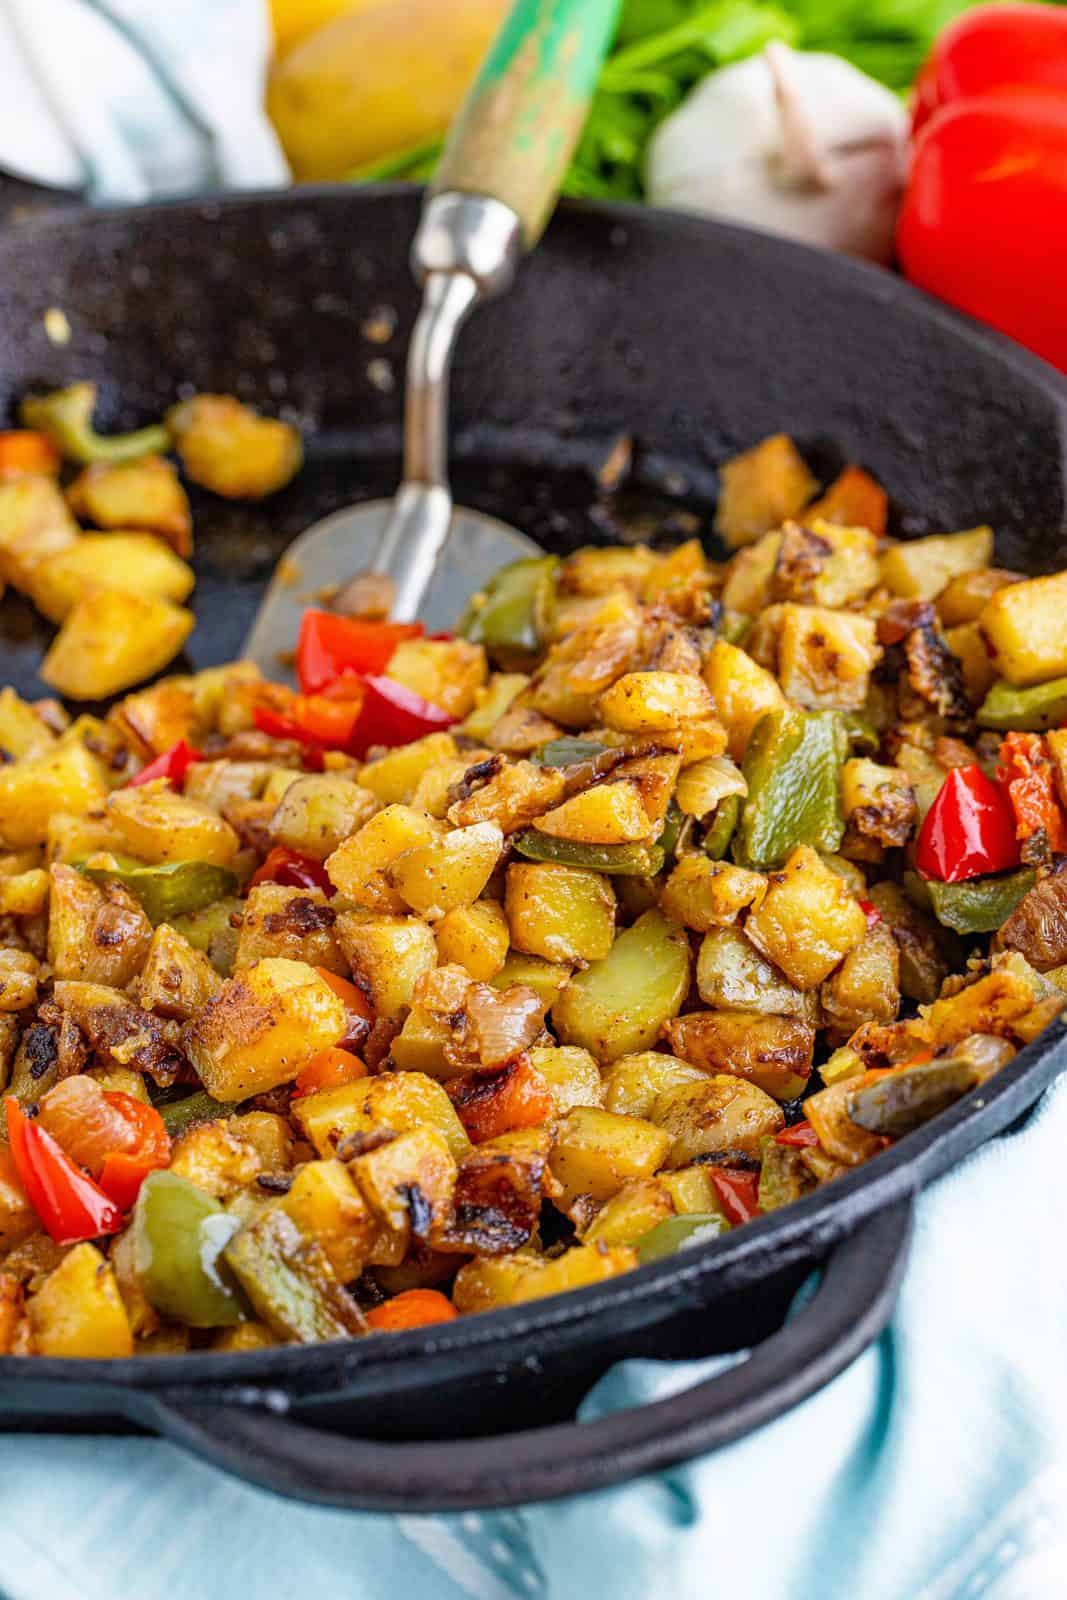 Southern Home Fries in skillet with spatula.